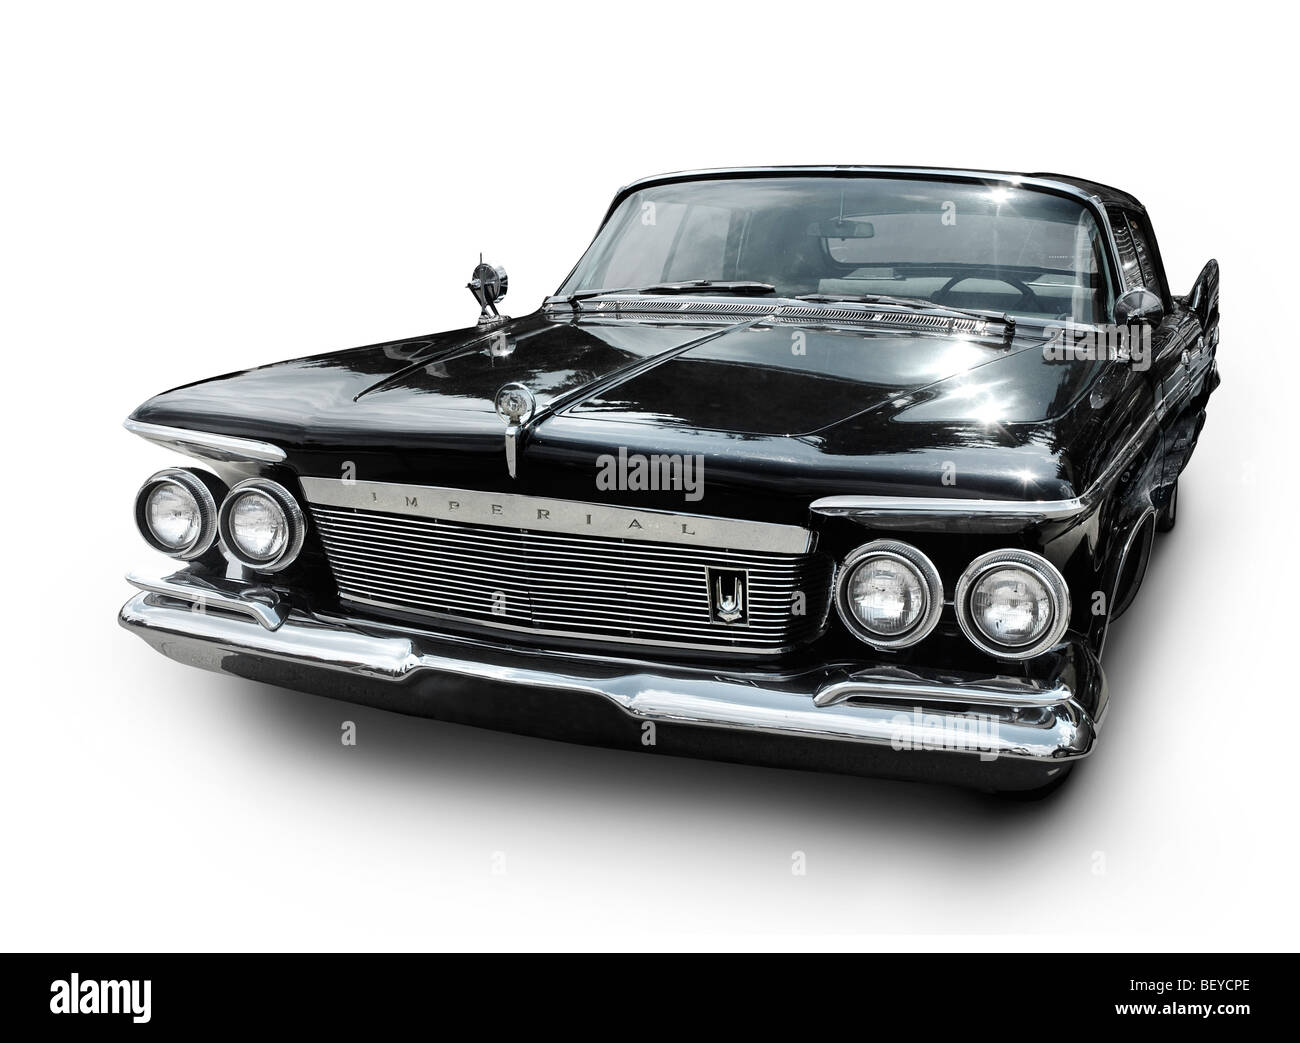 1961 black Chrysler Imperial Crown classic car Stock Photo